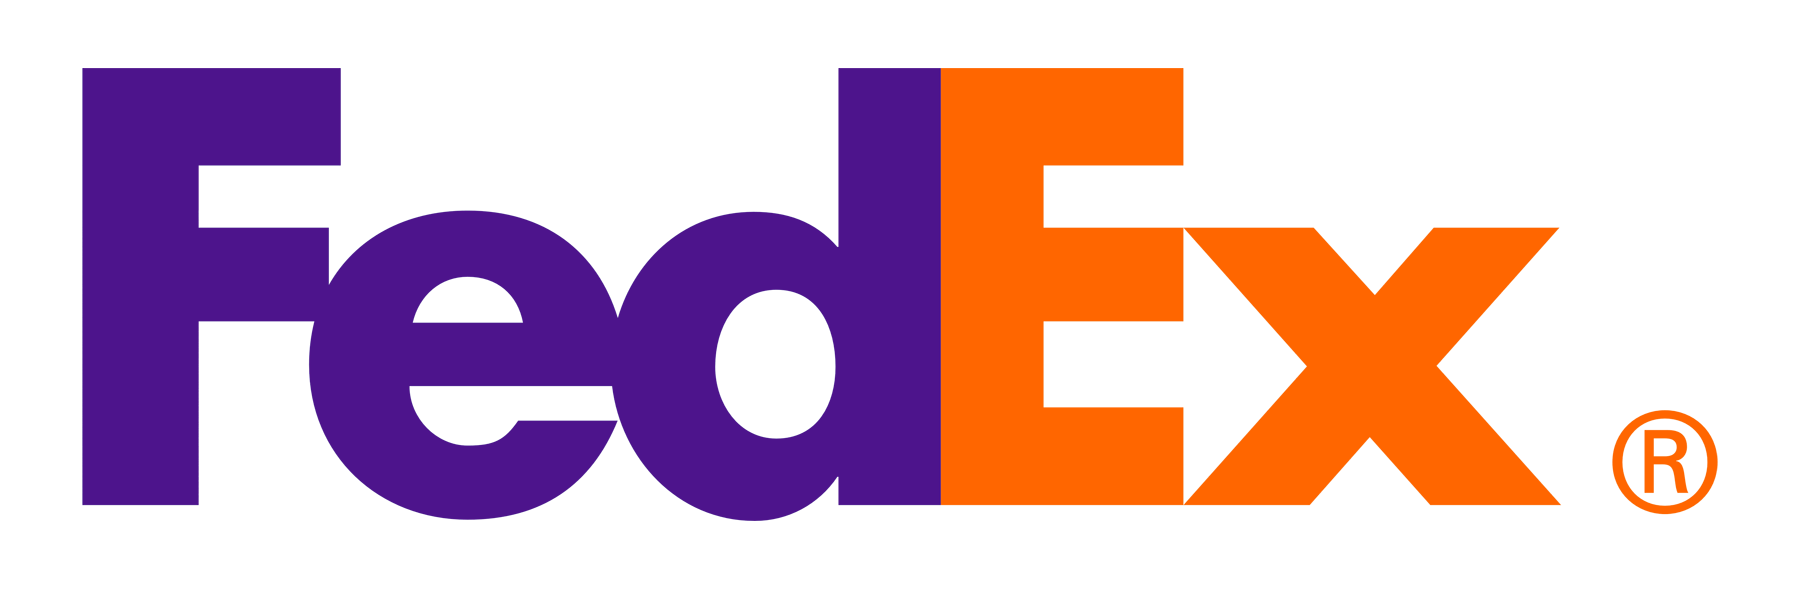 Logo Picture Fedex Free HD Image PNG Image